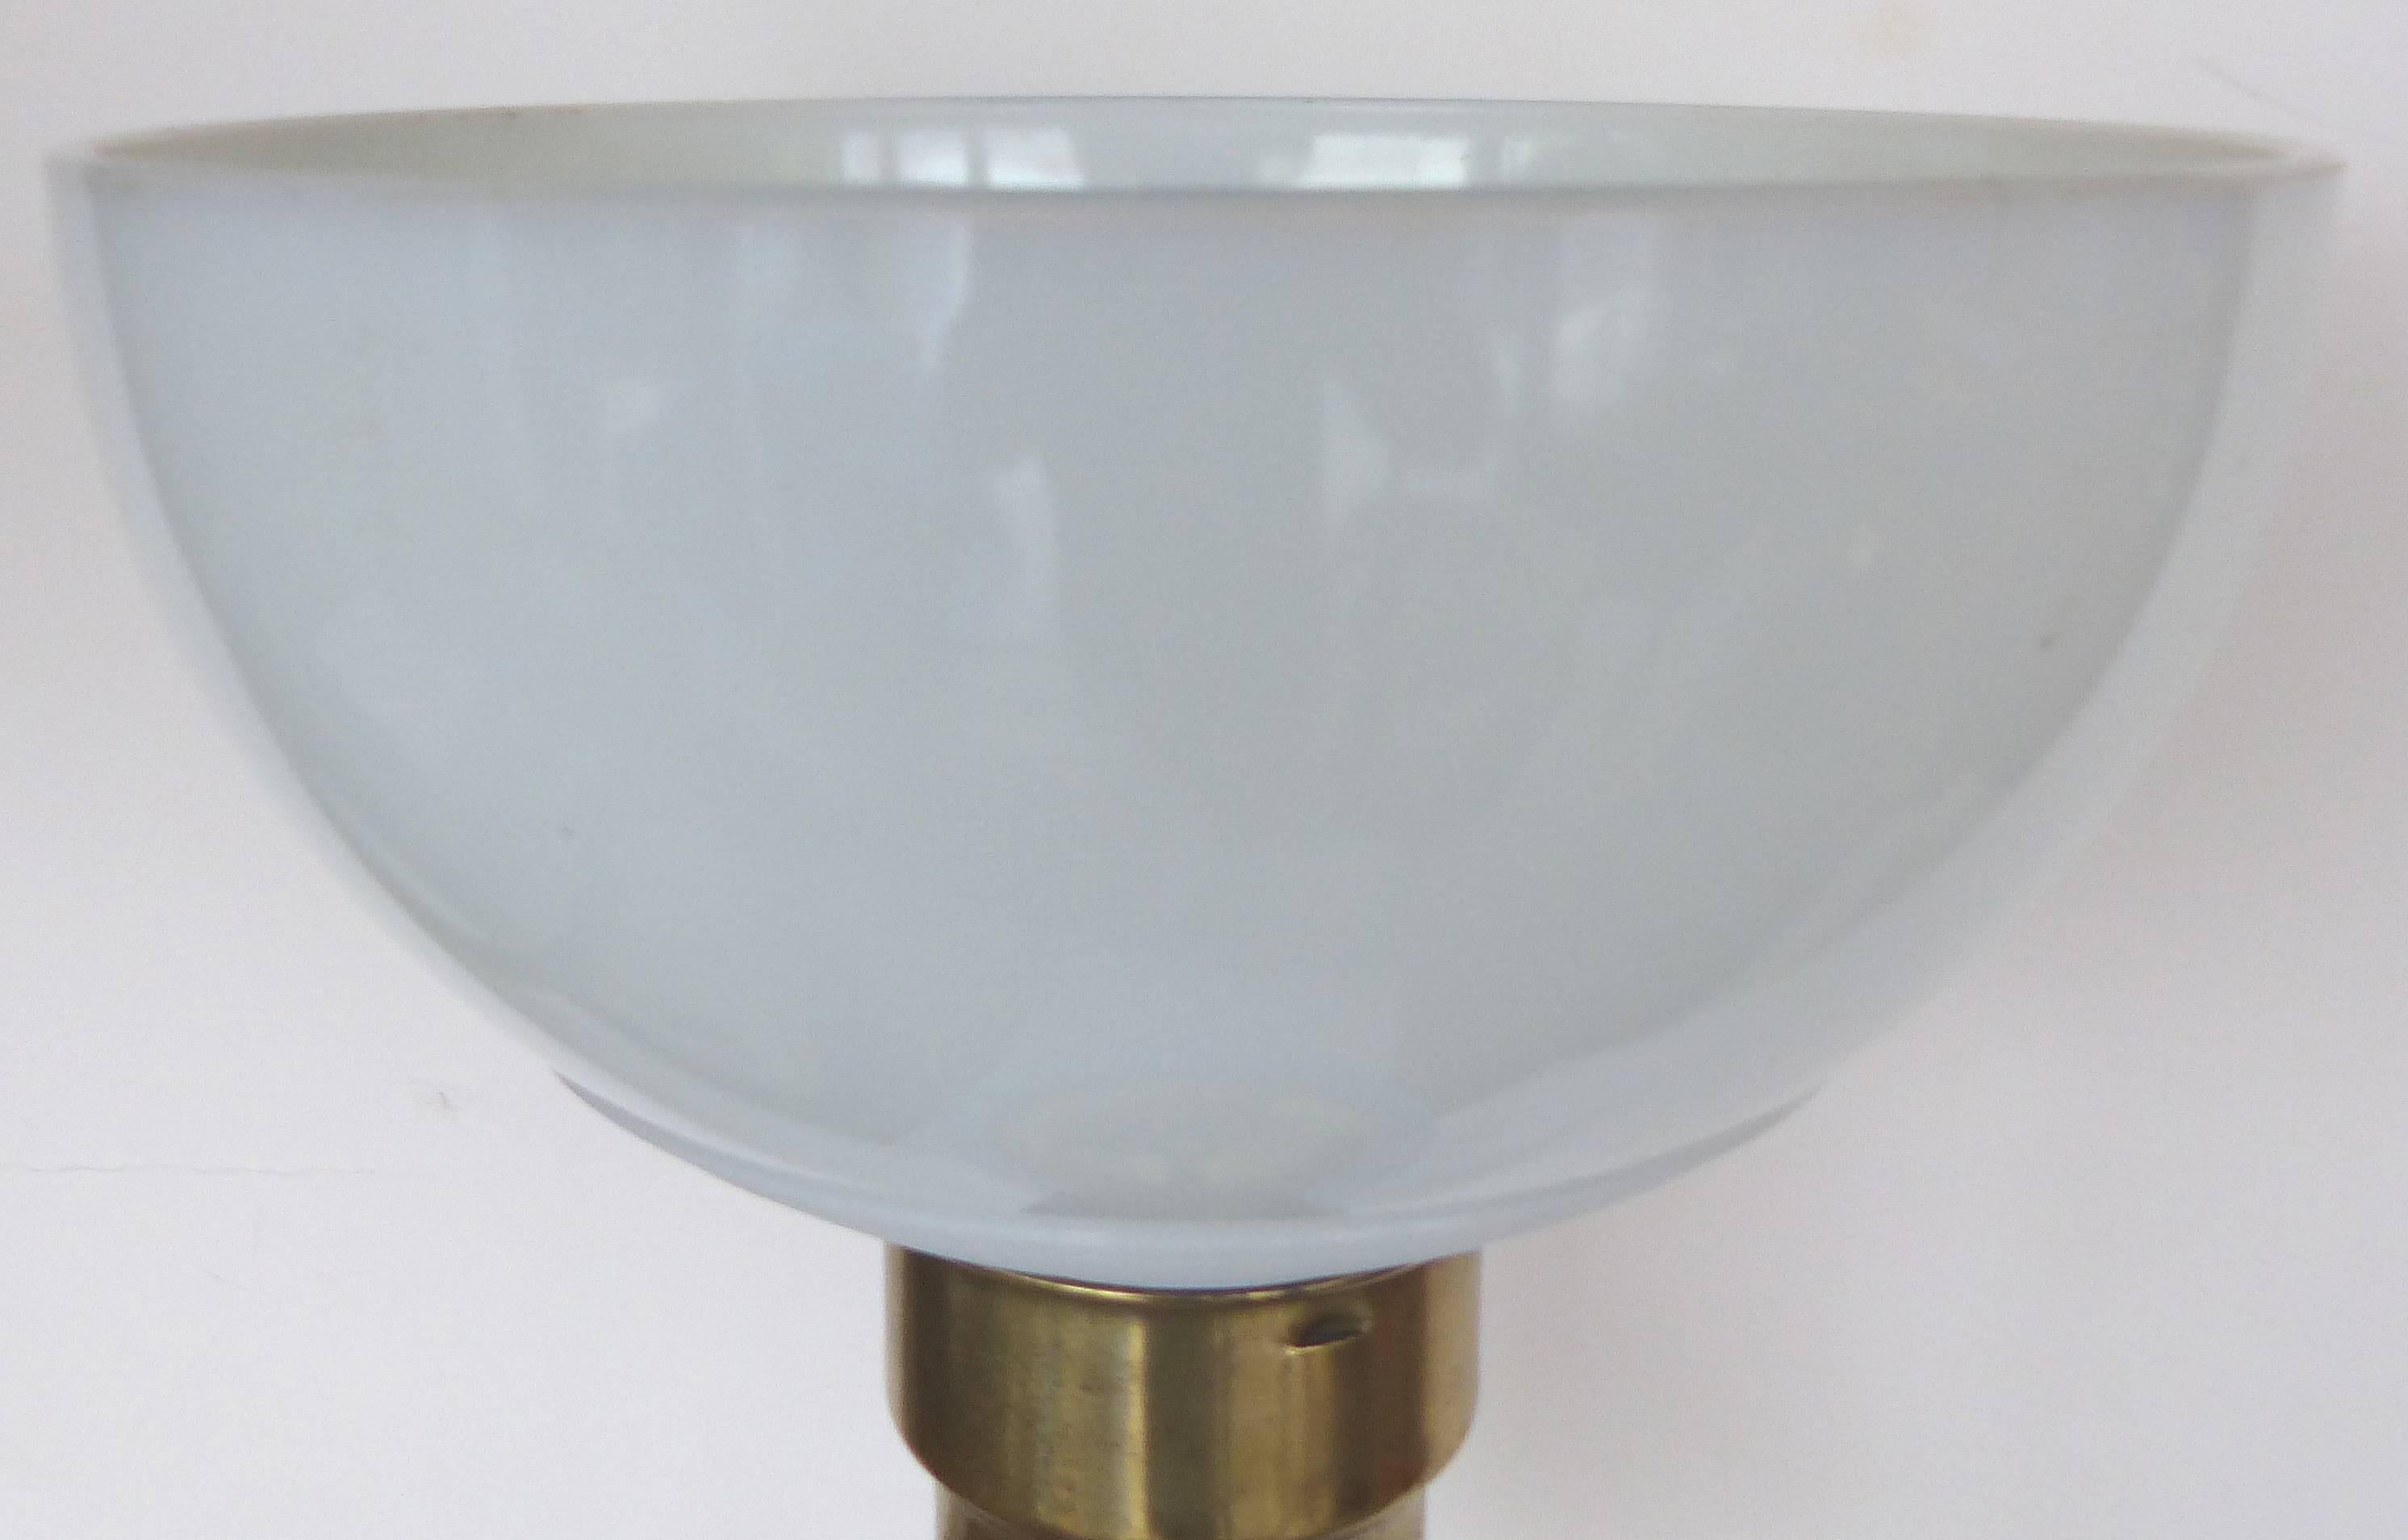 Mid-Century Modern Blue Murano Glass Table Lamp by Marbro

A large Mid-Century Murano glass table lamp by Marbro Lamp Co. supported by an ebonized wood base with brass fittings. The diffuser shade is provided and support a shade above. Retains the